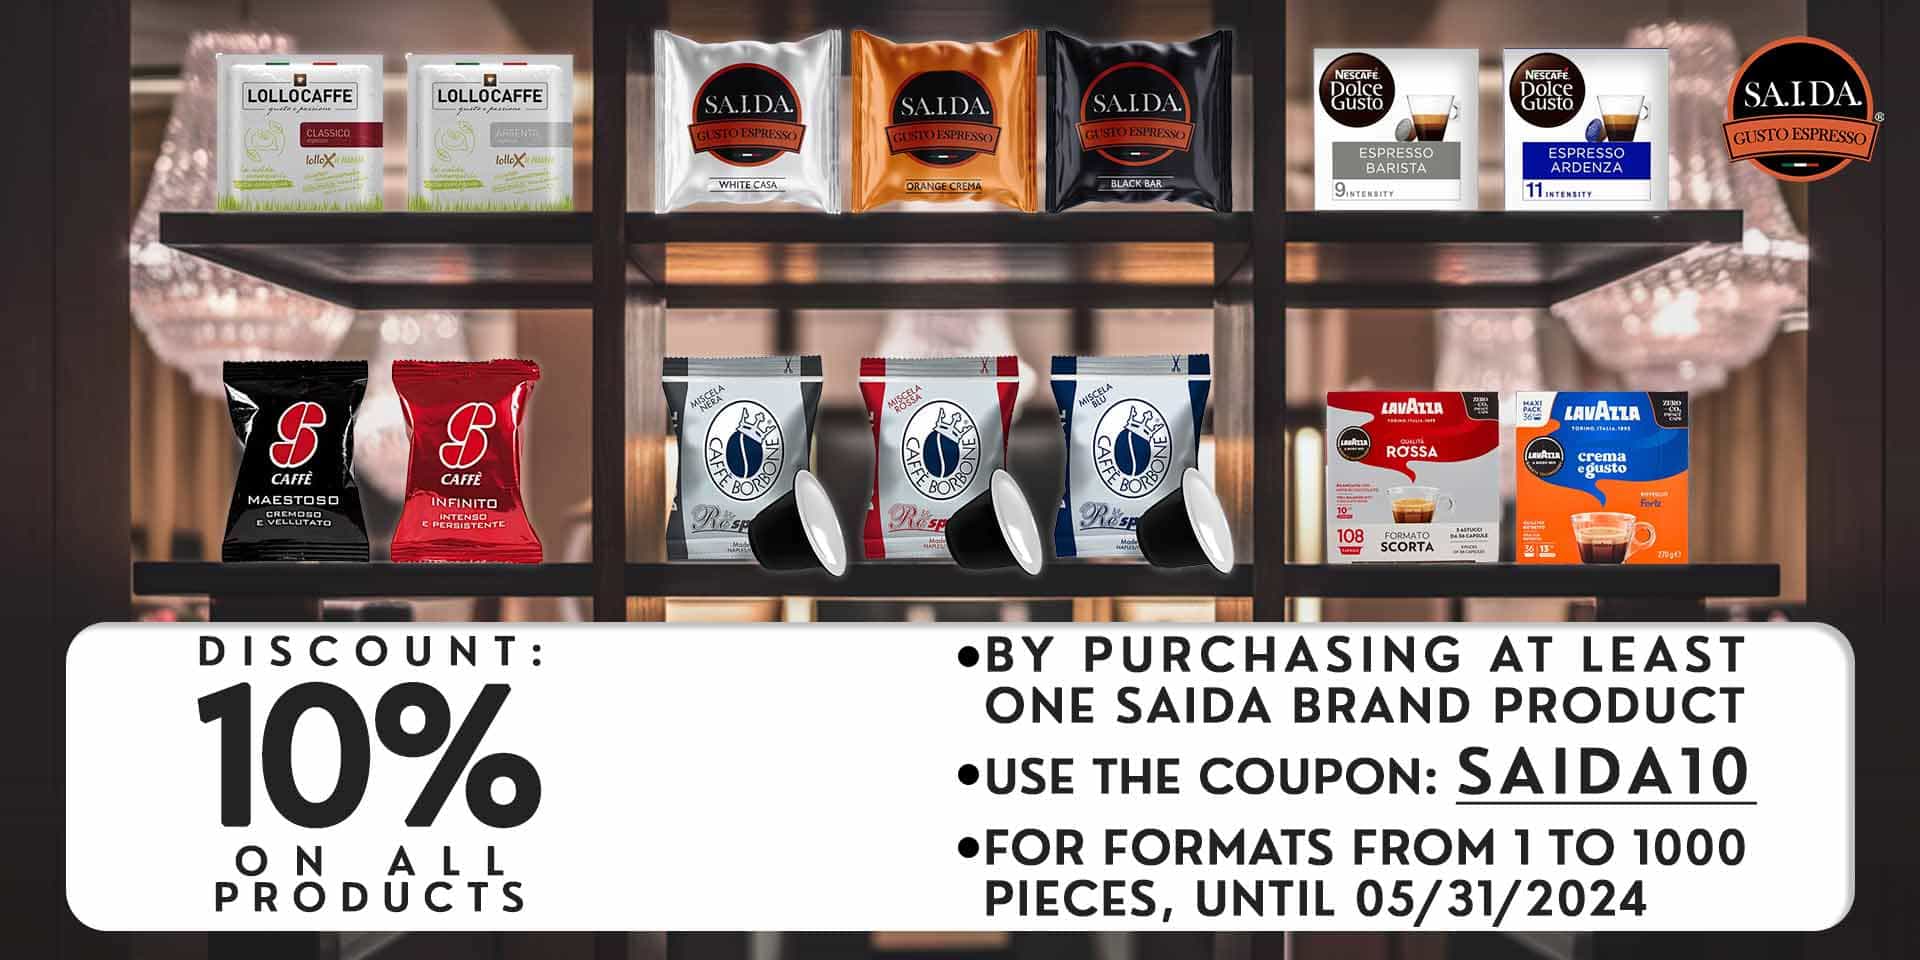 all-brands/coffee-and-related-products/saida-gusto-espresso